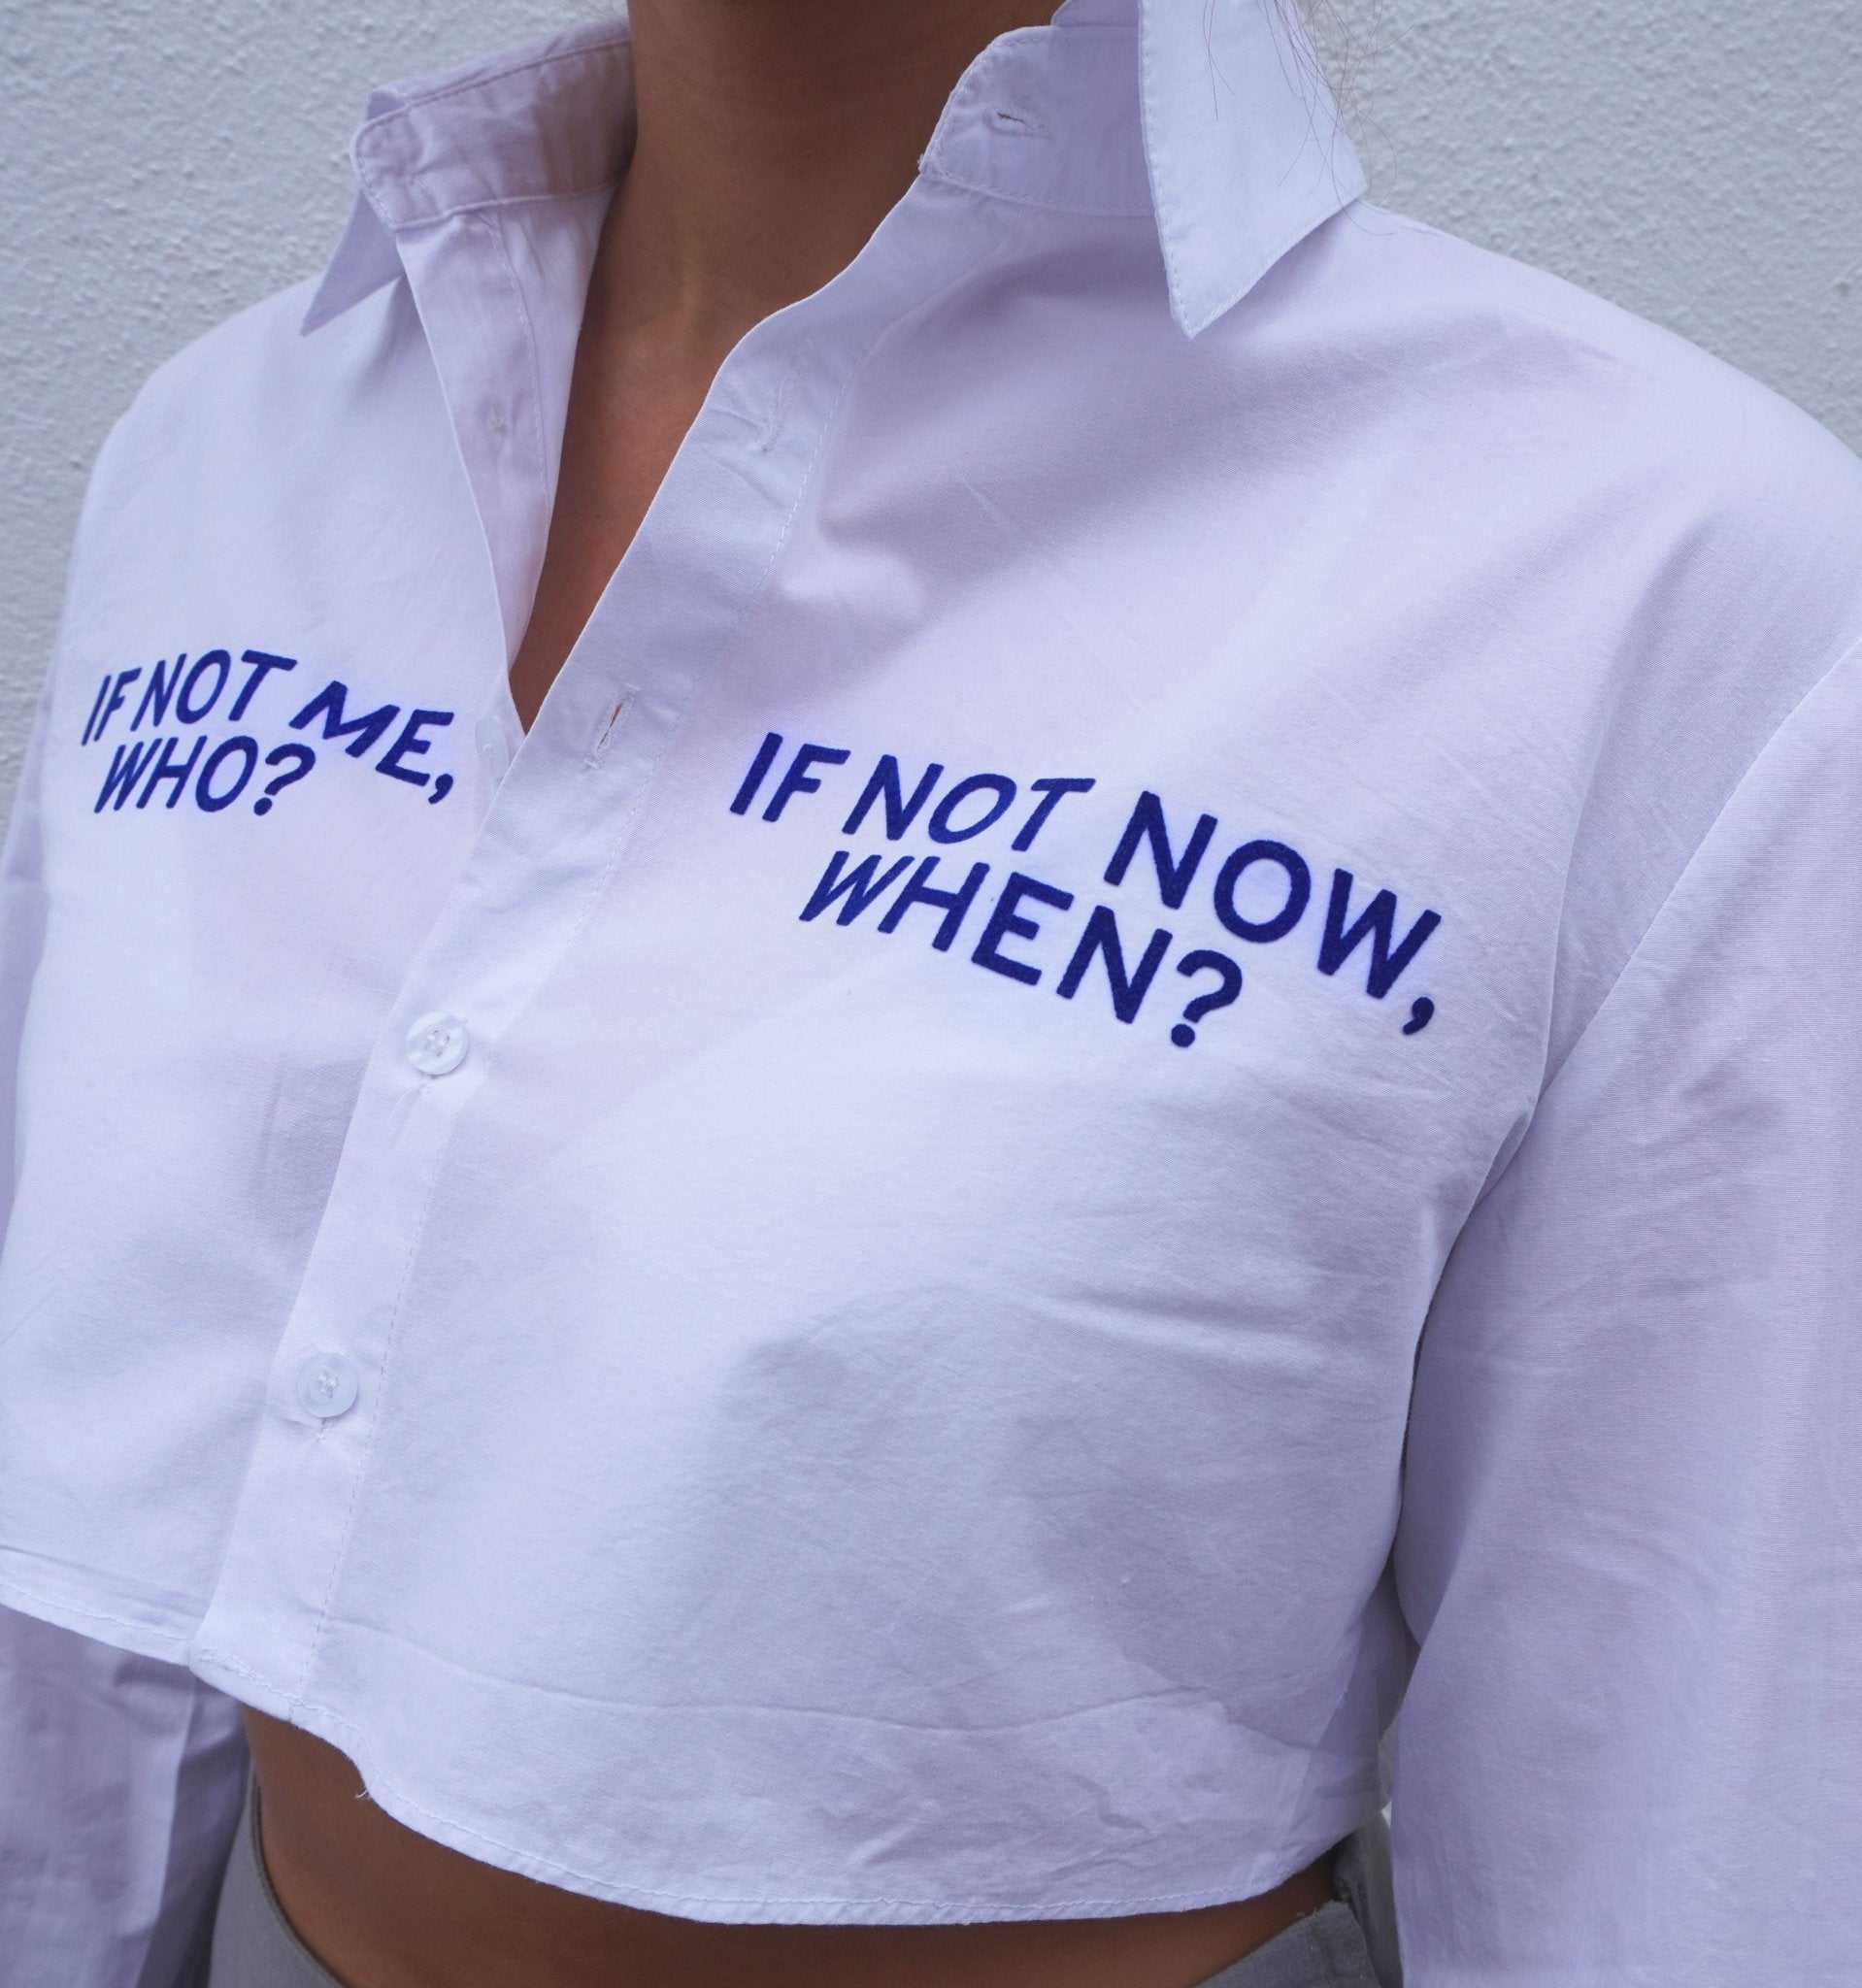 Upcycled White Shirt 'IF NOT ME, WHO? IF NOT NOW, WHEN?' - Electric Blue - OBLIVIOUS?